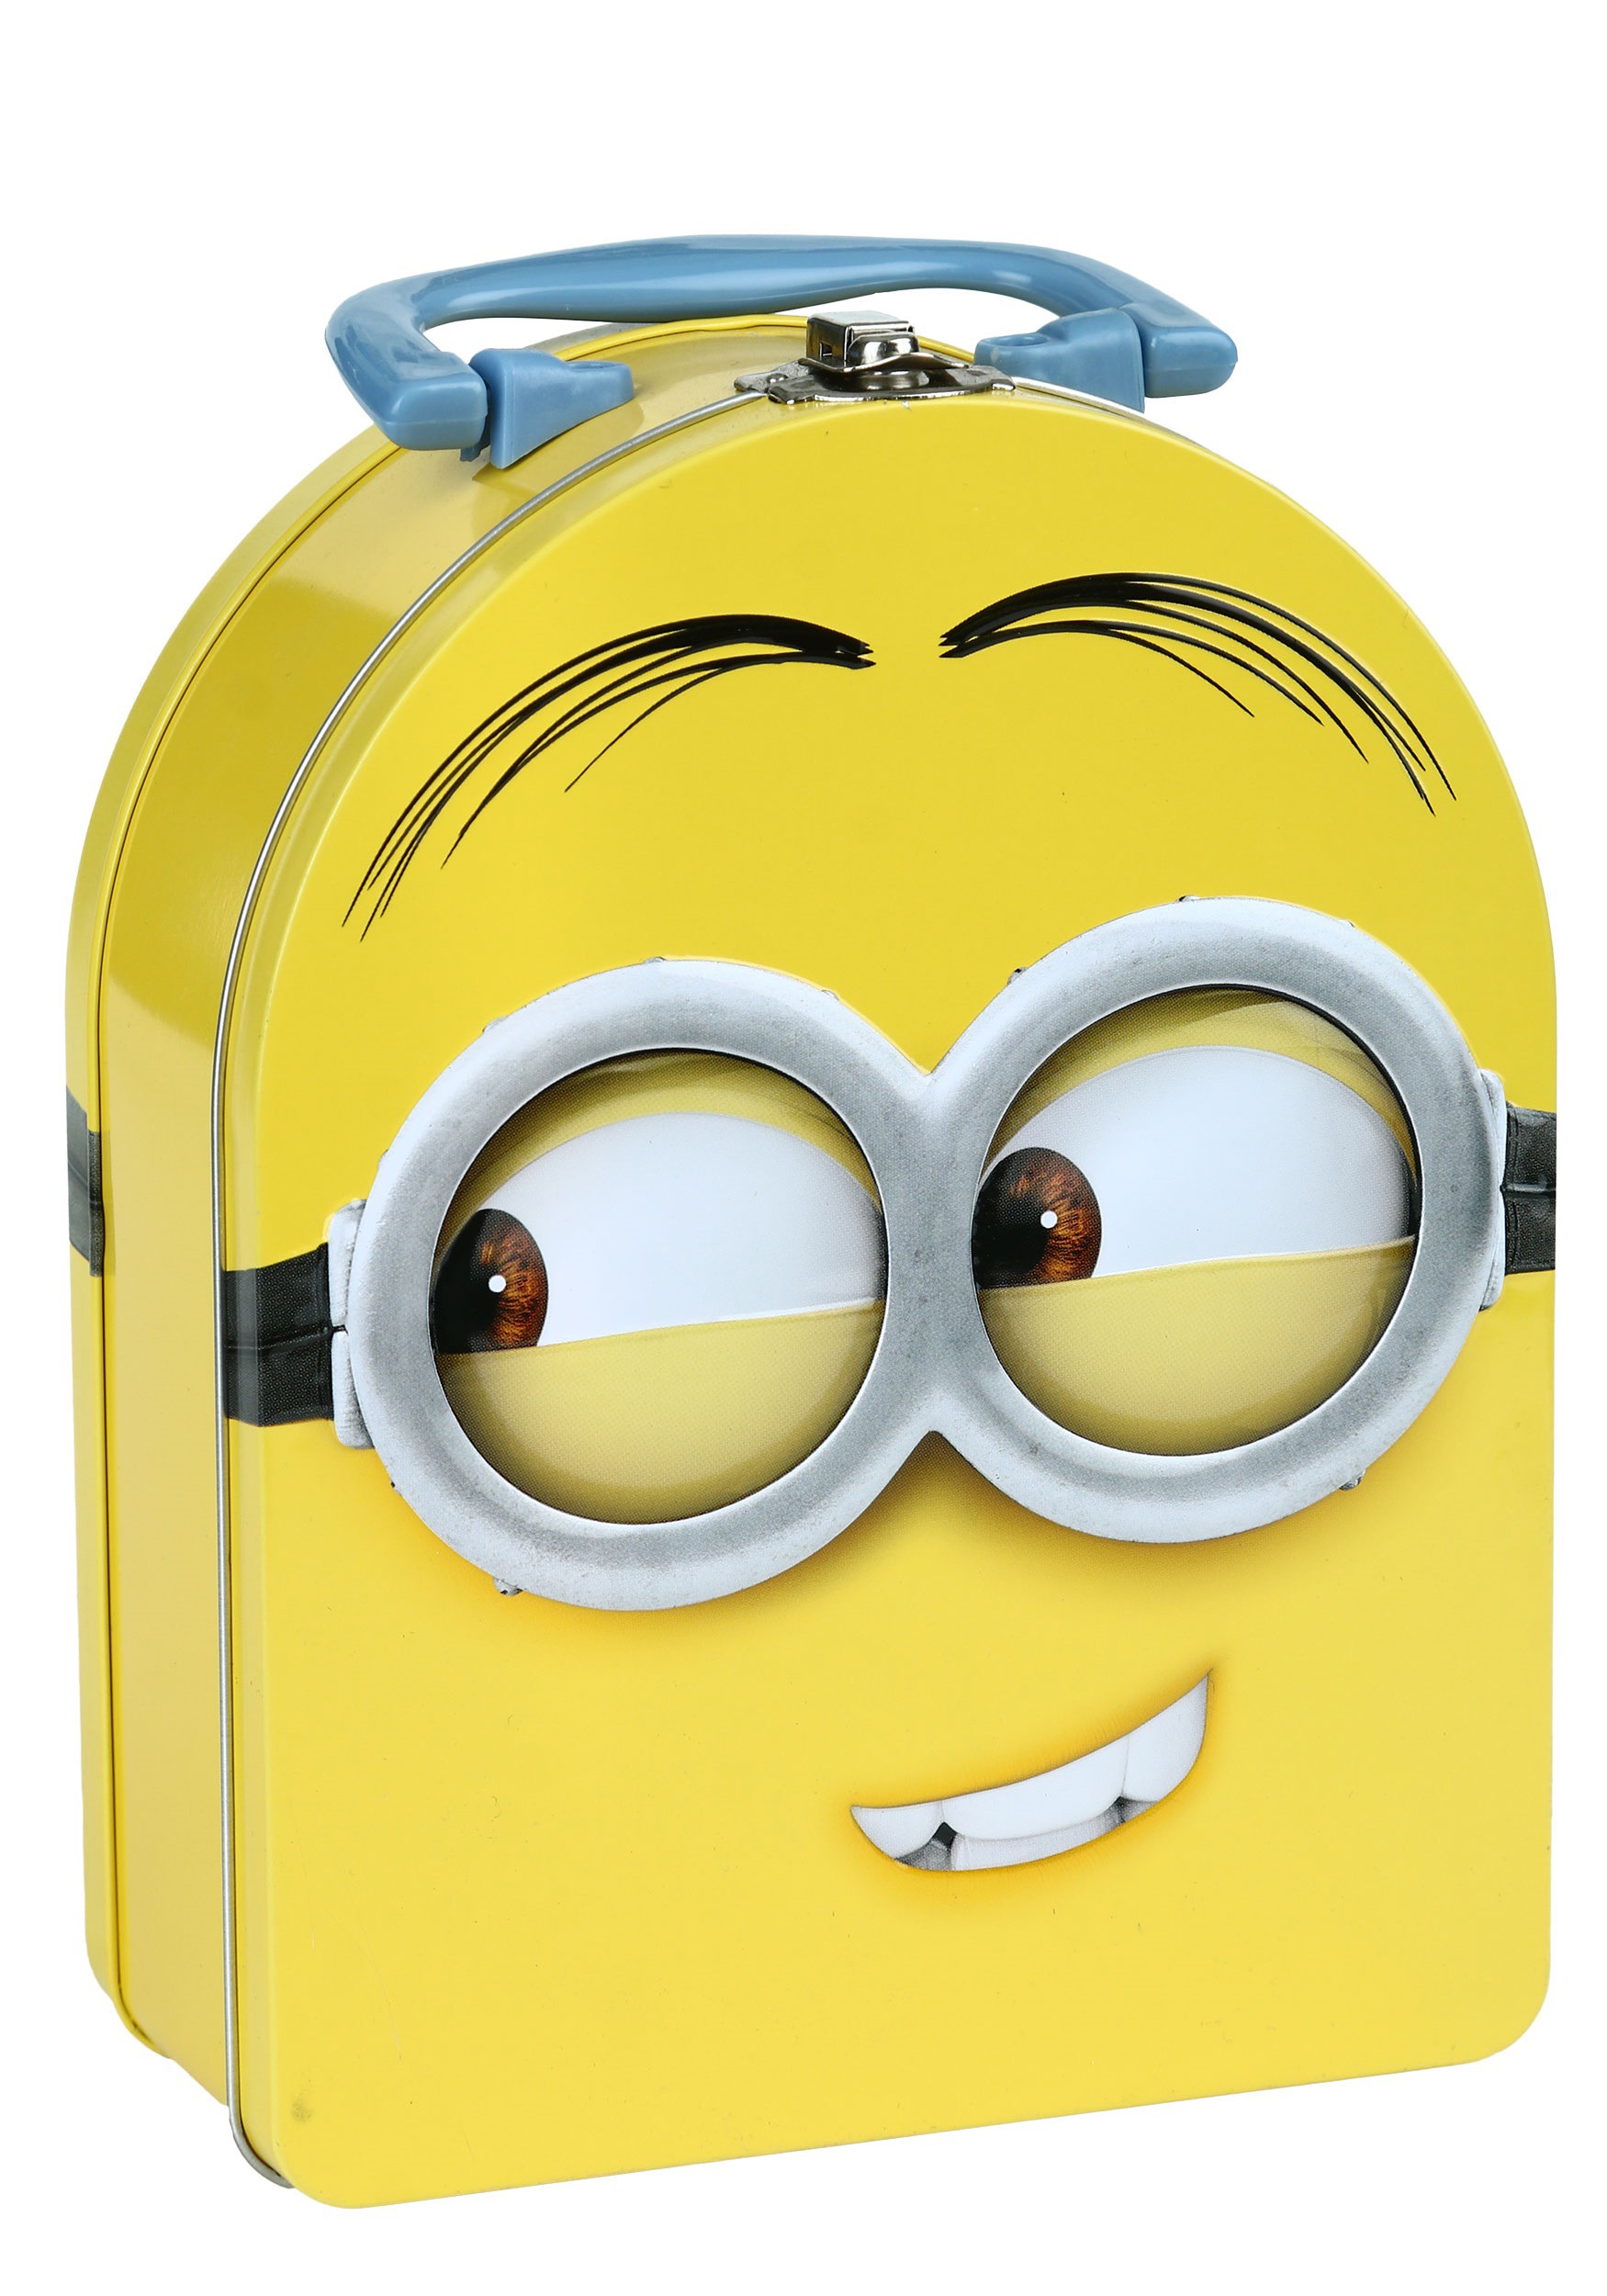 Smiling Minion Yellow Colored Tin Small Kids Lunch Box